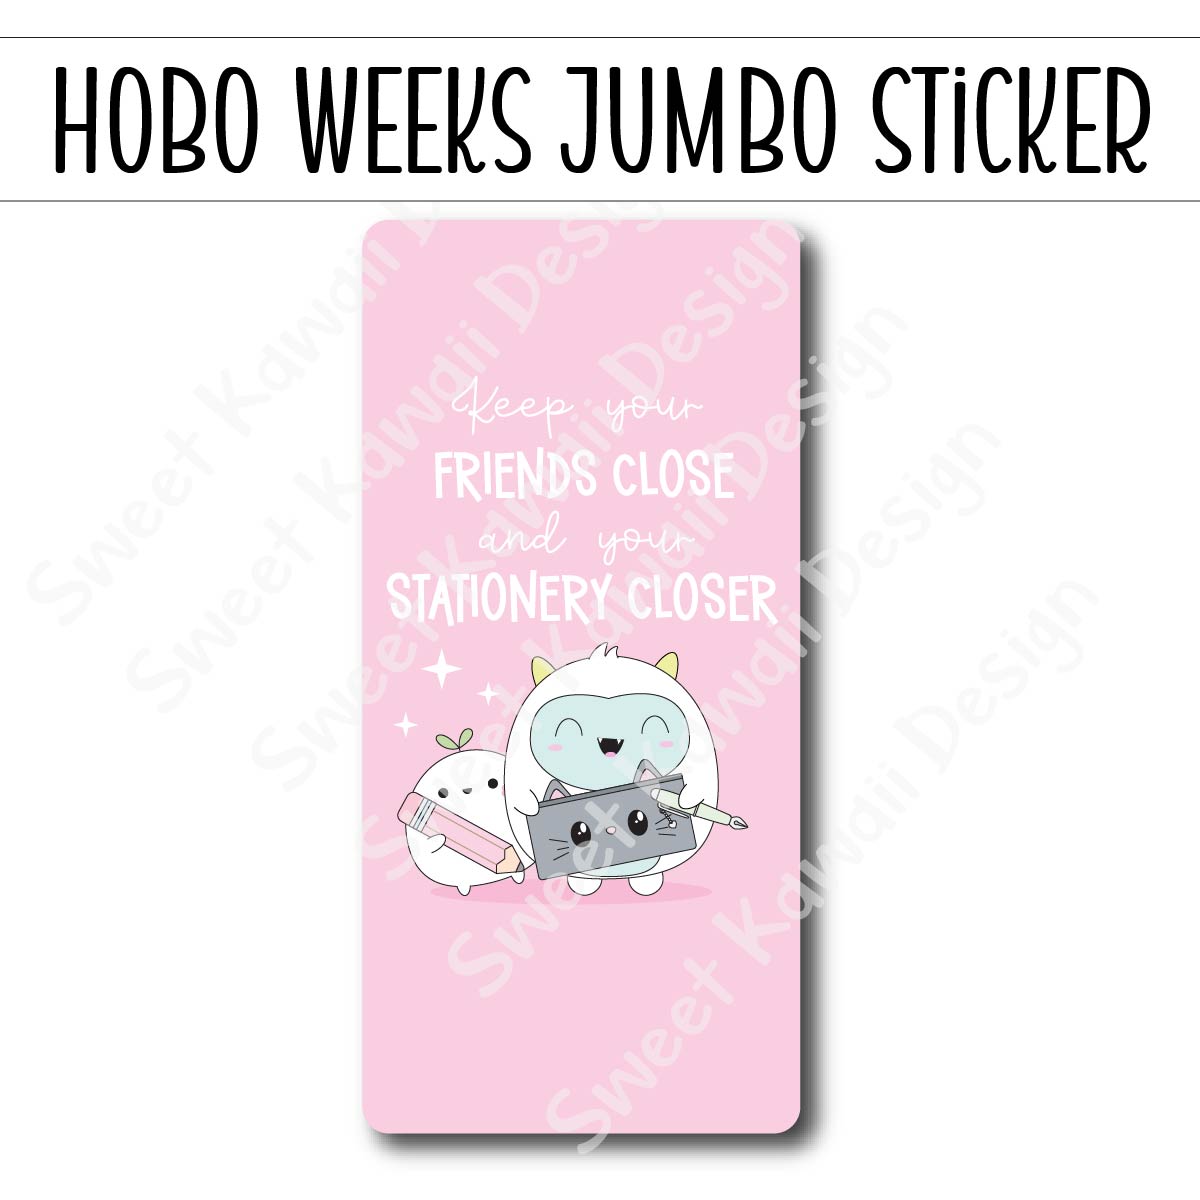 Kawaii Jumbo Sticker - Friends and Stationery - Size Options Available